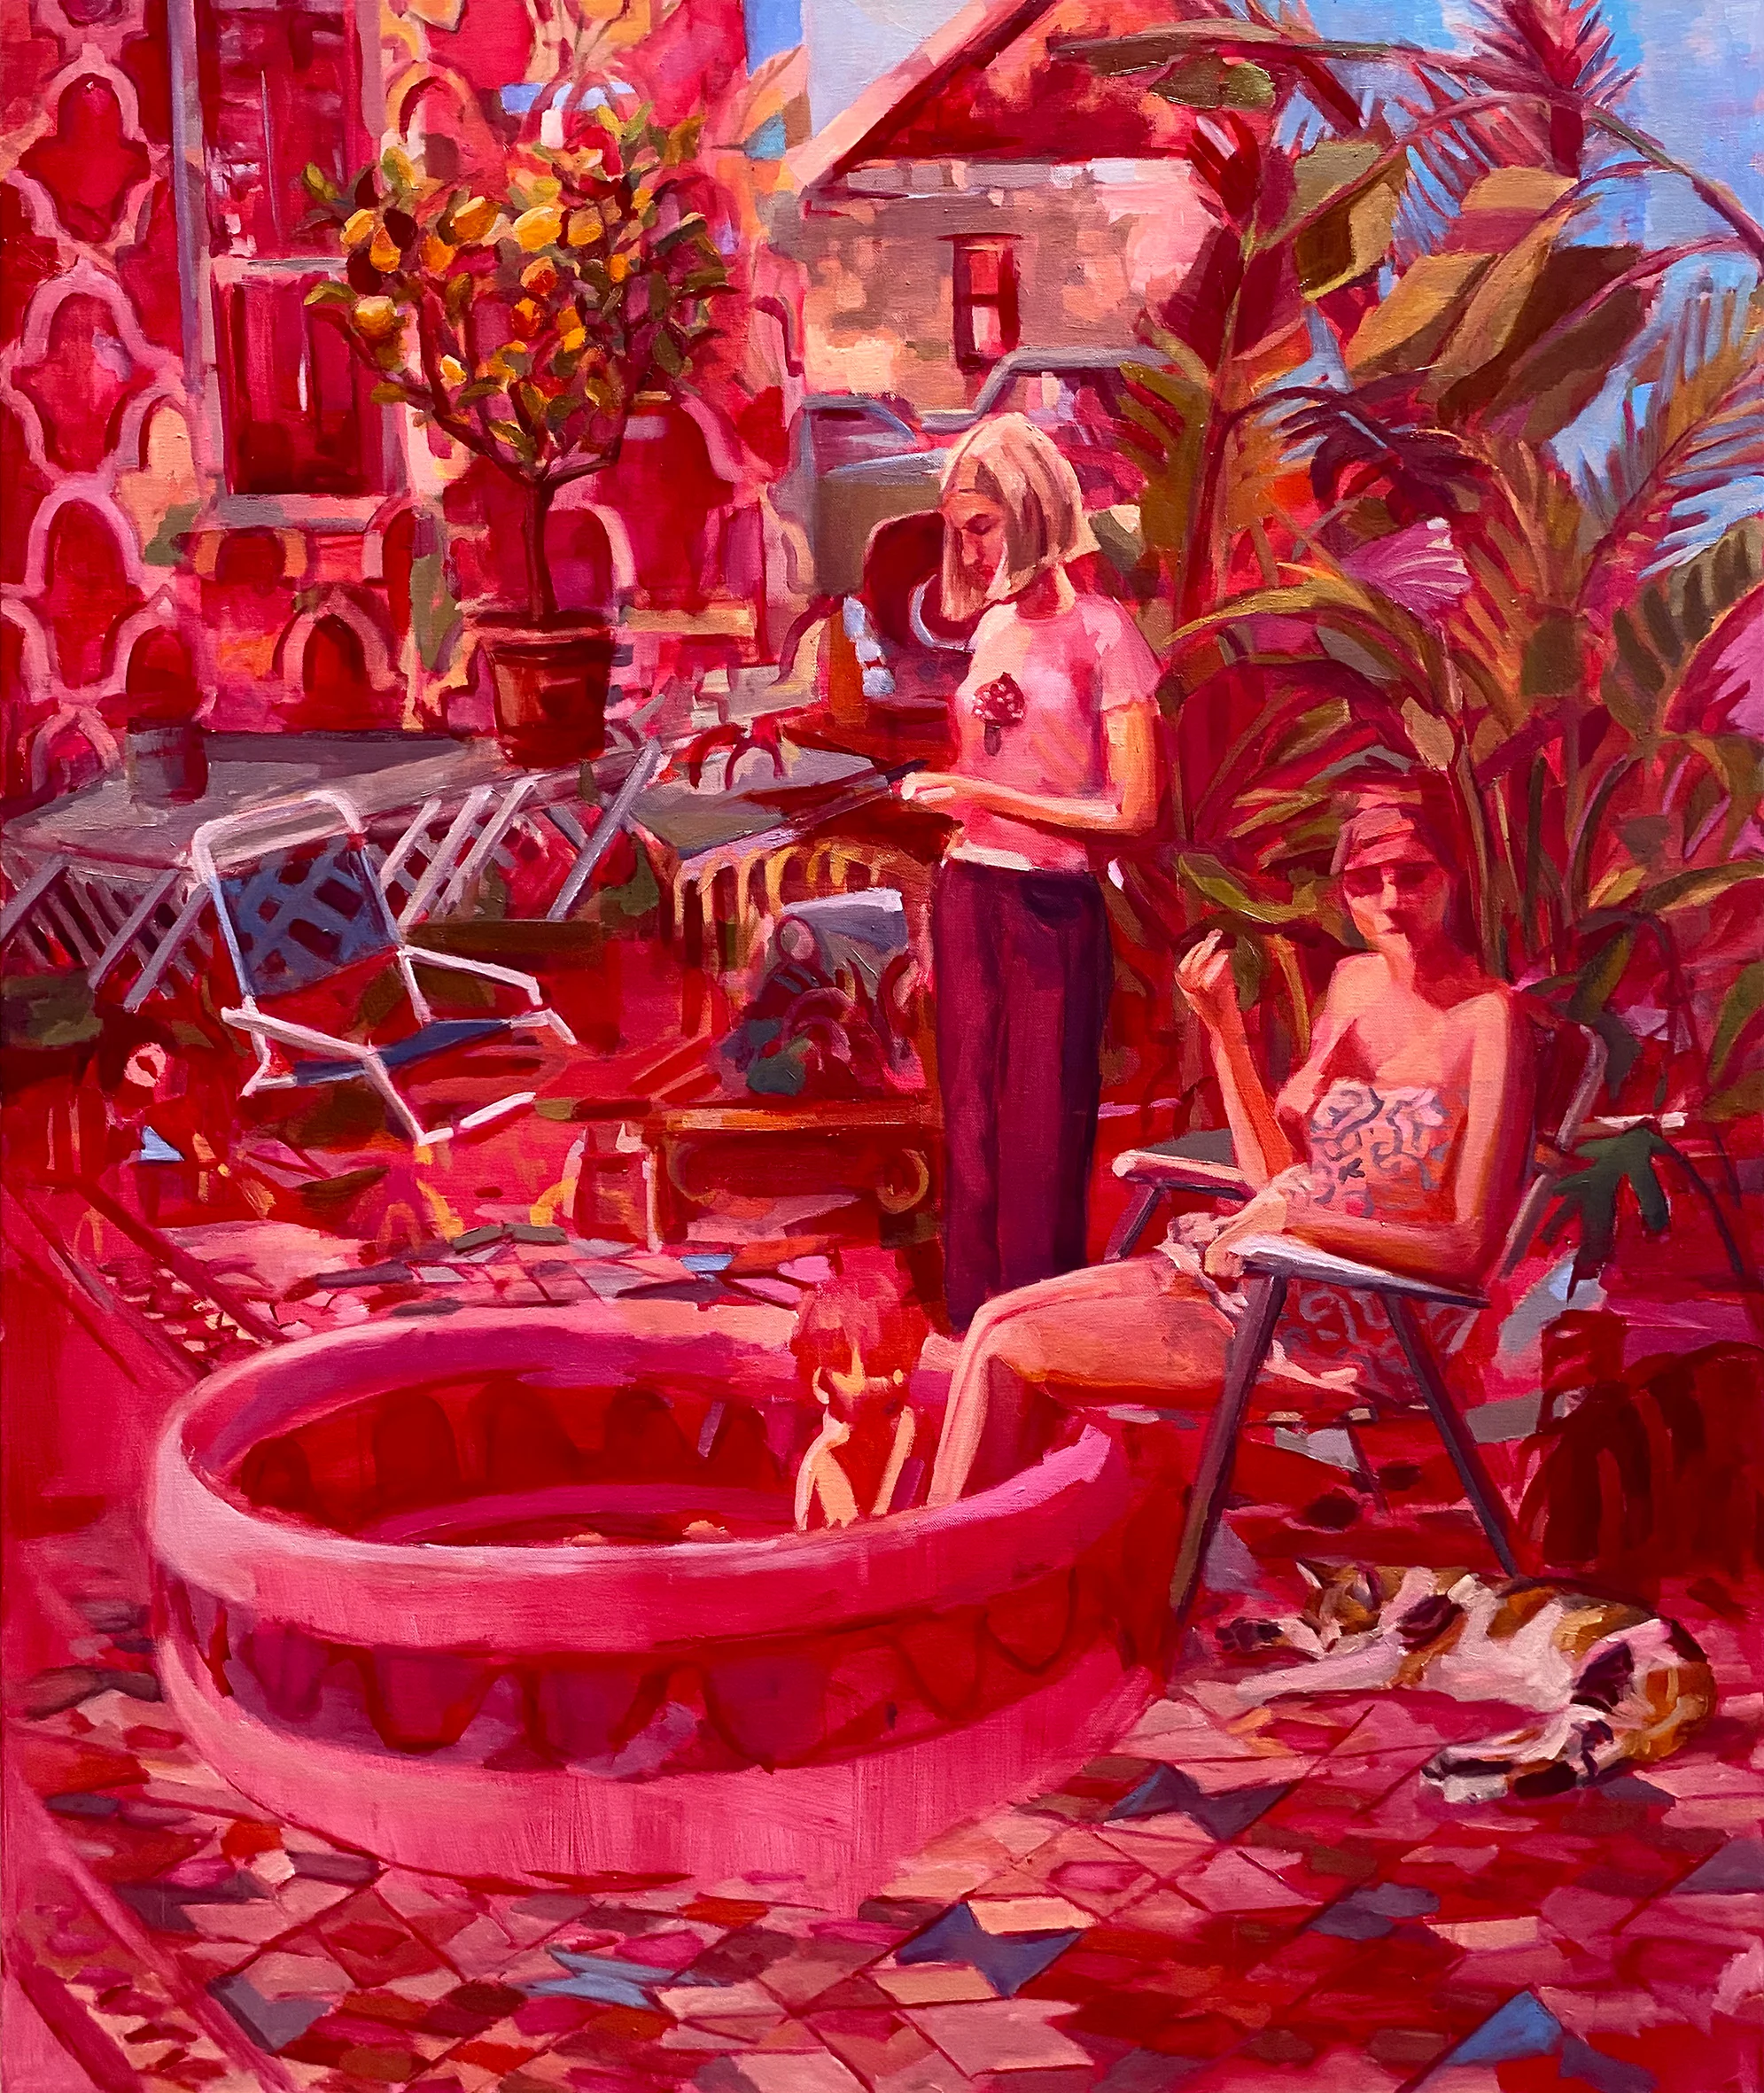 Pink coloured image of a paddle pool. A small child is in the pool. A lady sits next to it with her feet in the water, while another lady stands